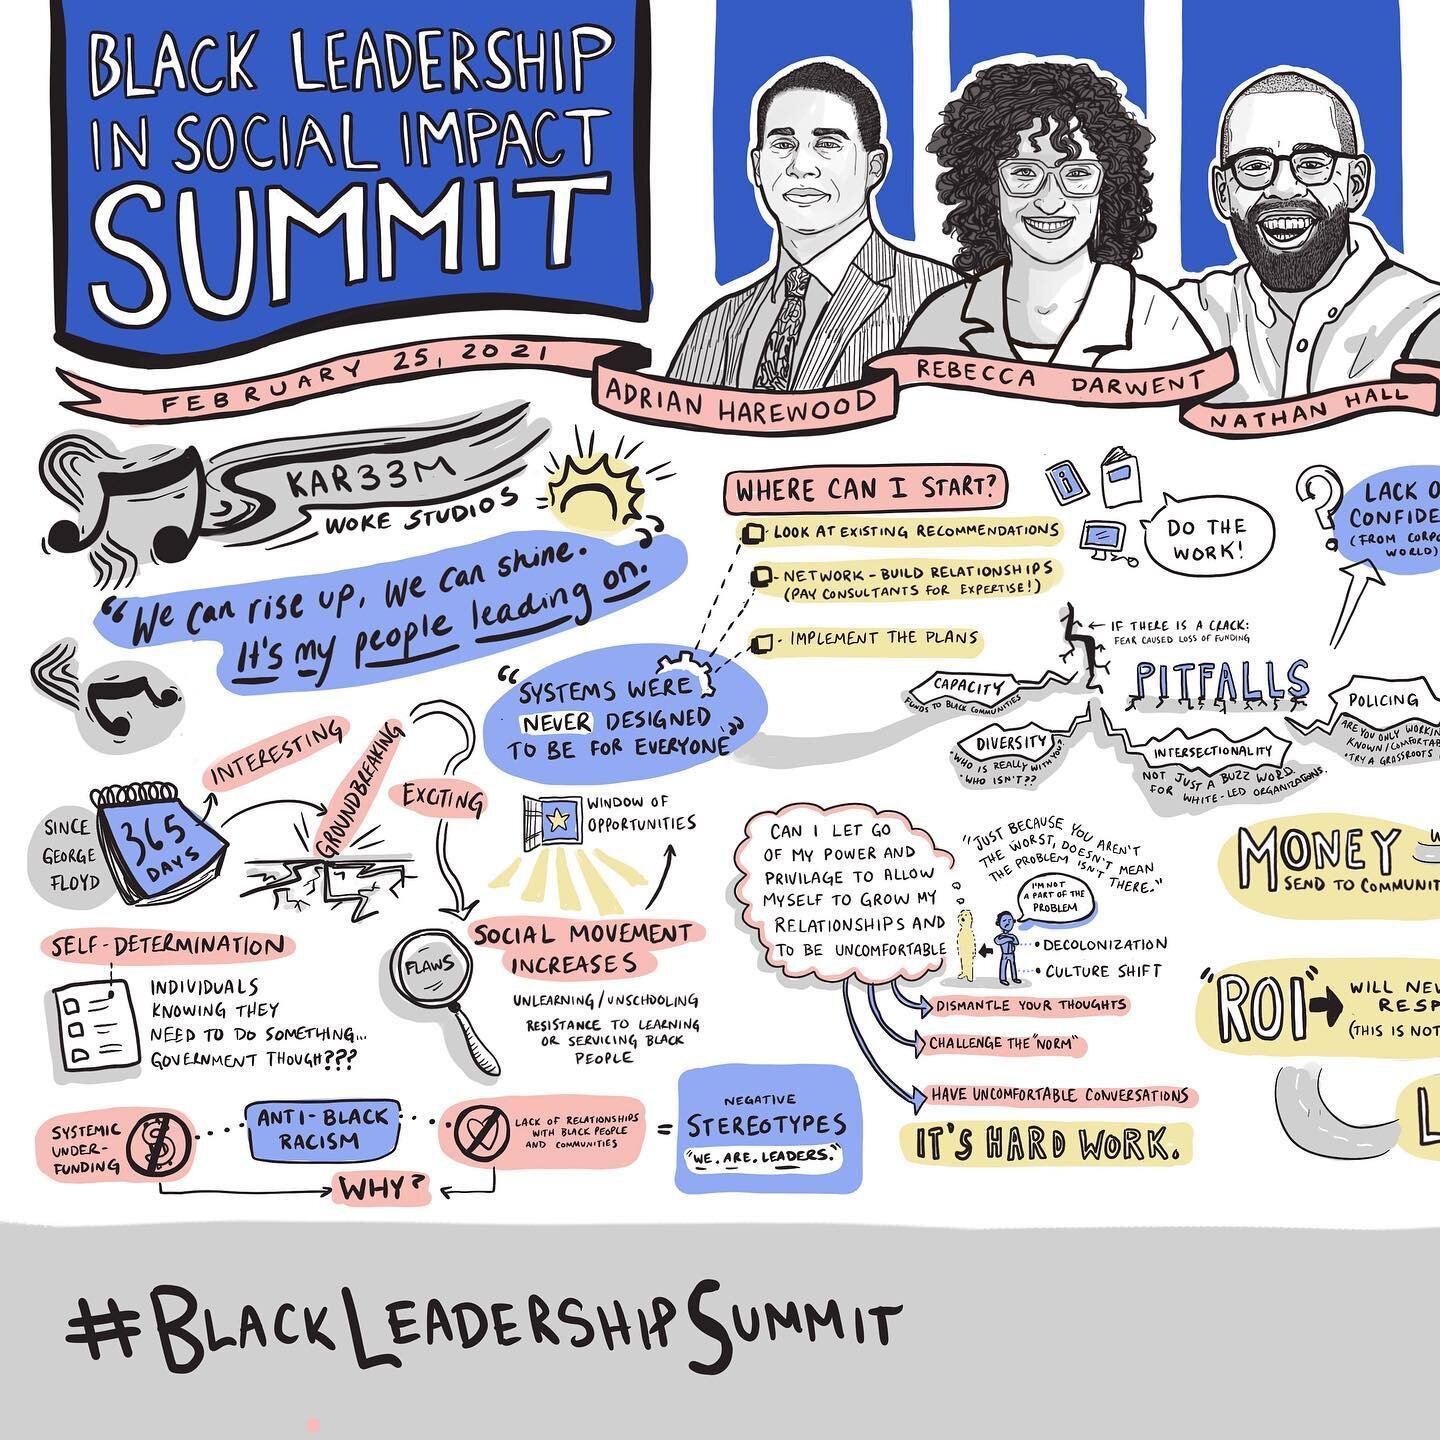 Today I graphically recorded the #BlackLeadershipSummit for @futureofgood_ . Wow! What a session and an experience. Grateful to have had the opportunity to be a part of the conversation.
.
.
.

#graphicrecording #illustration #scribing #infoillustrat